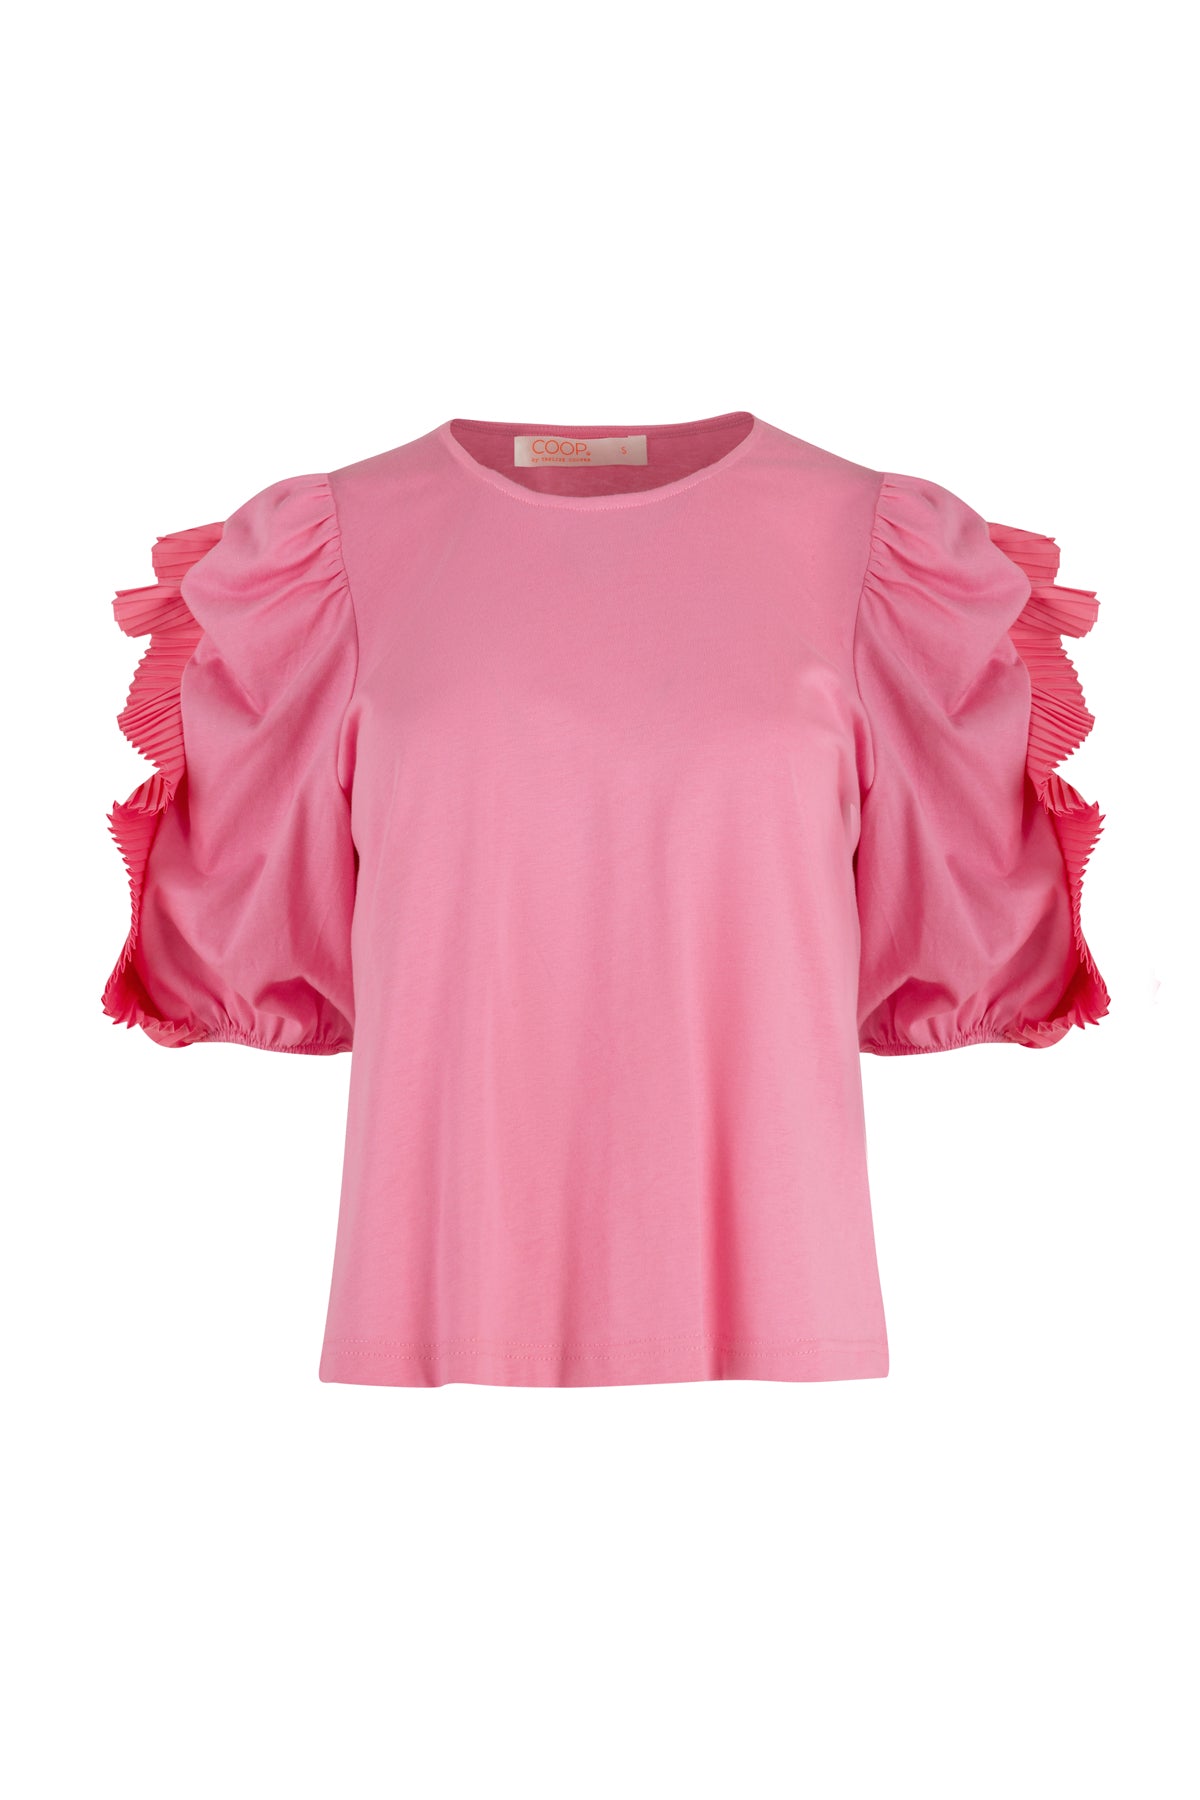 Home Pleat Top